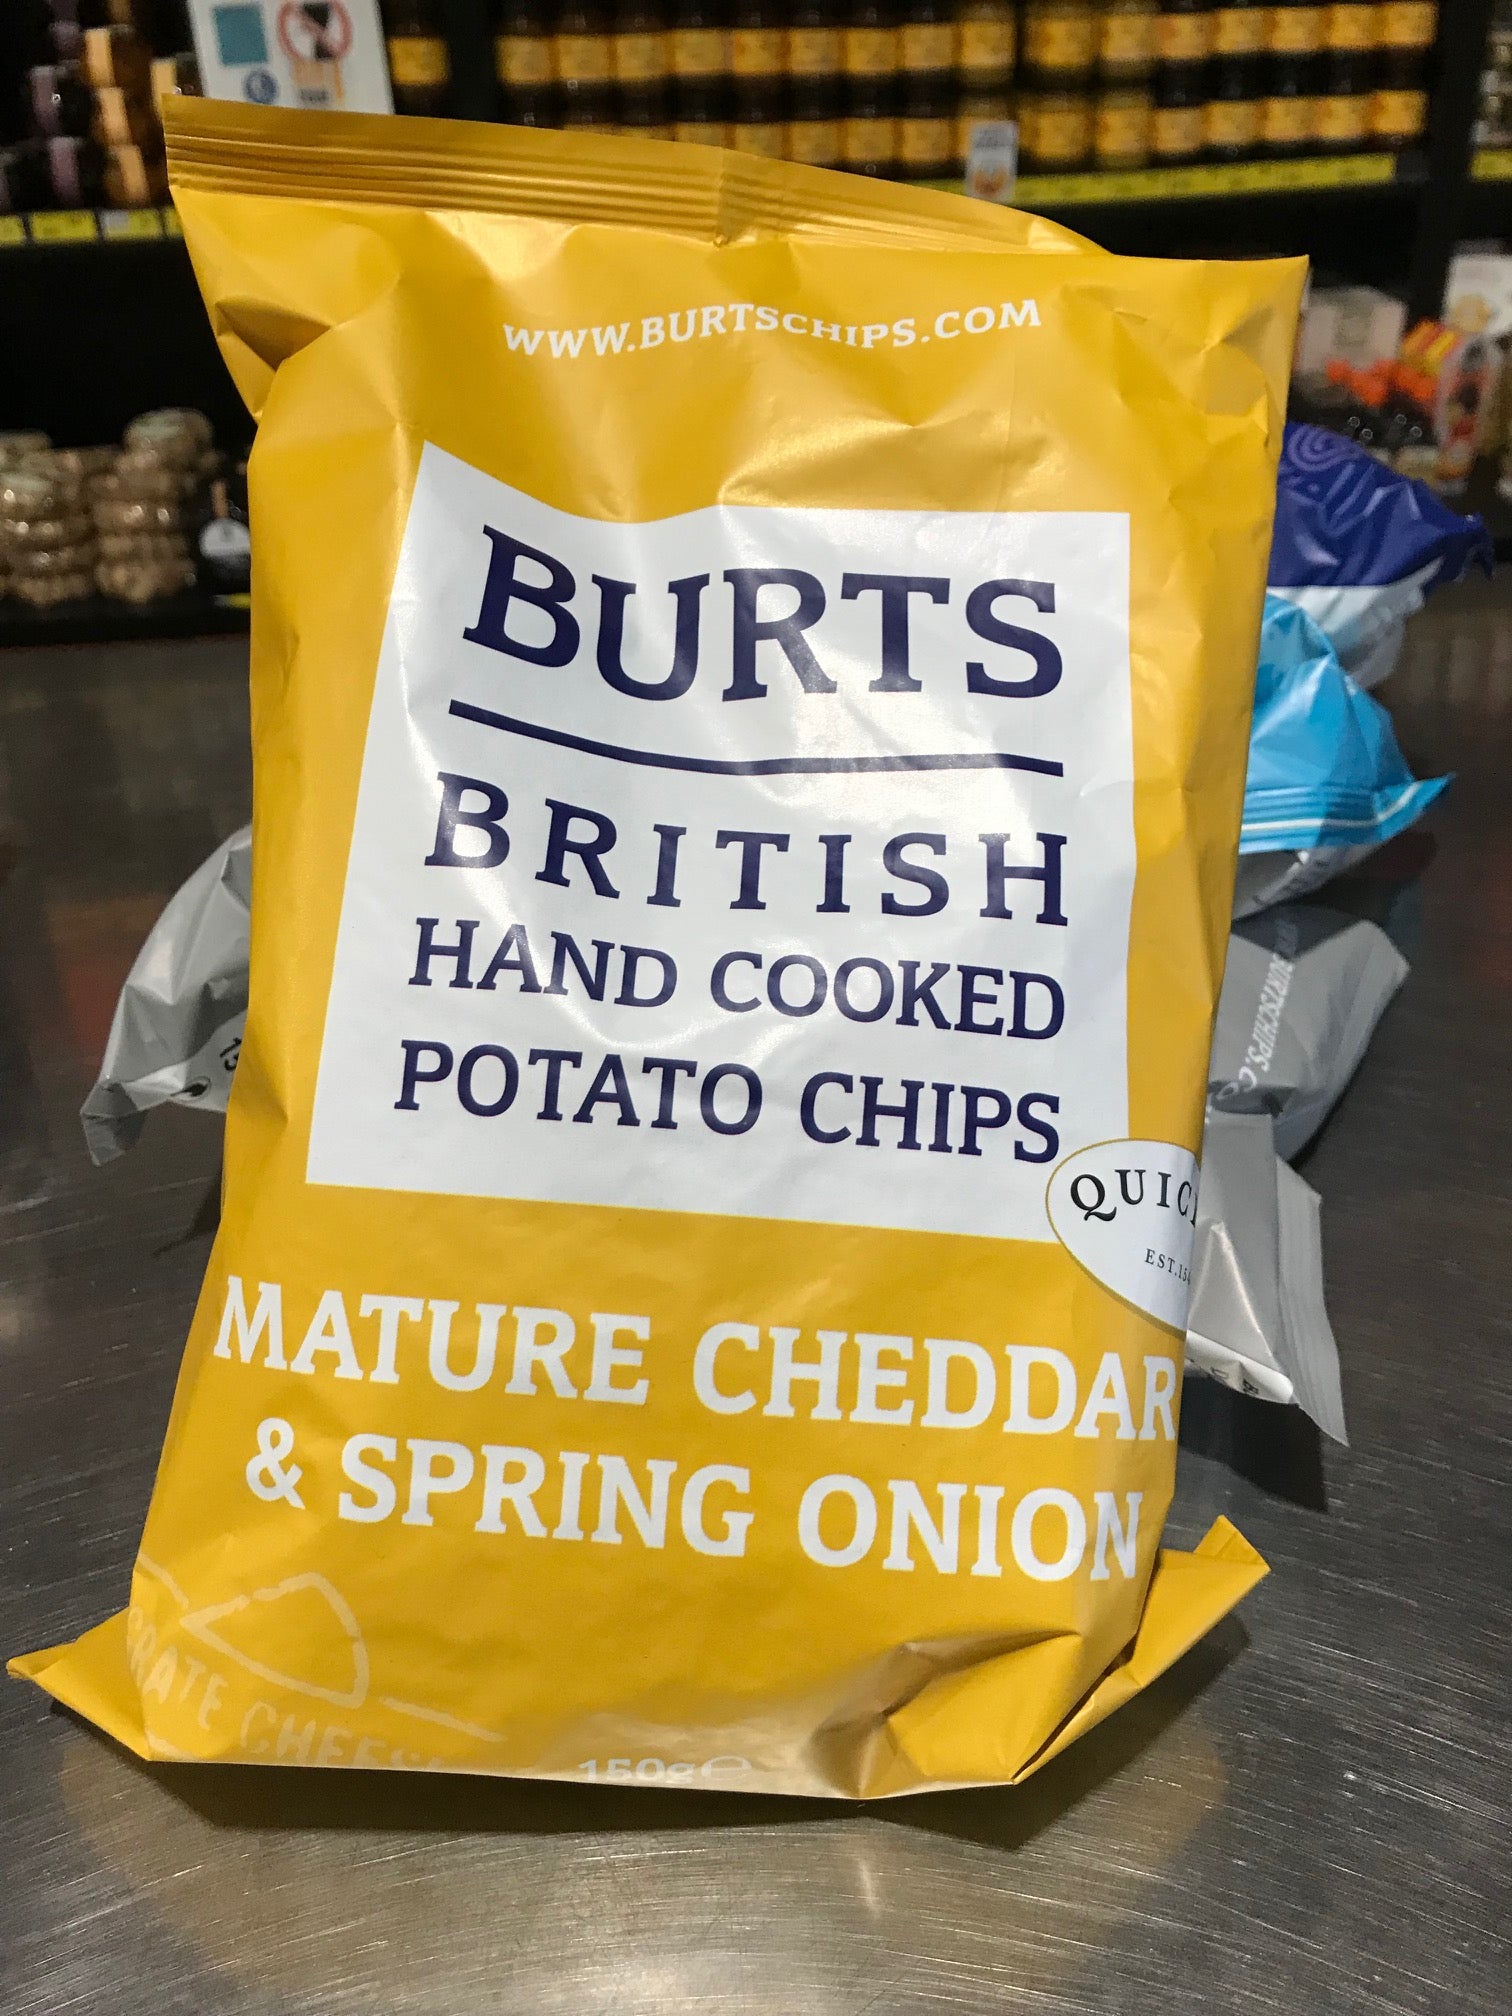 Burts - Mature Onion and Spring Cheddar - British Hand Cooked Potato Chips - $6.99 including GST